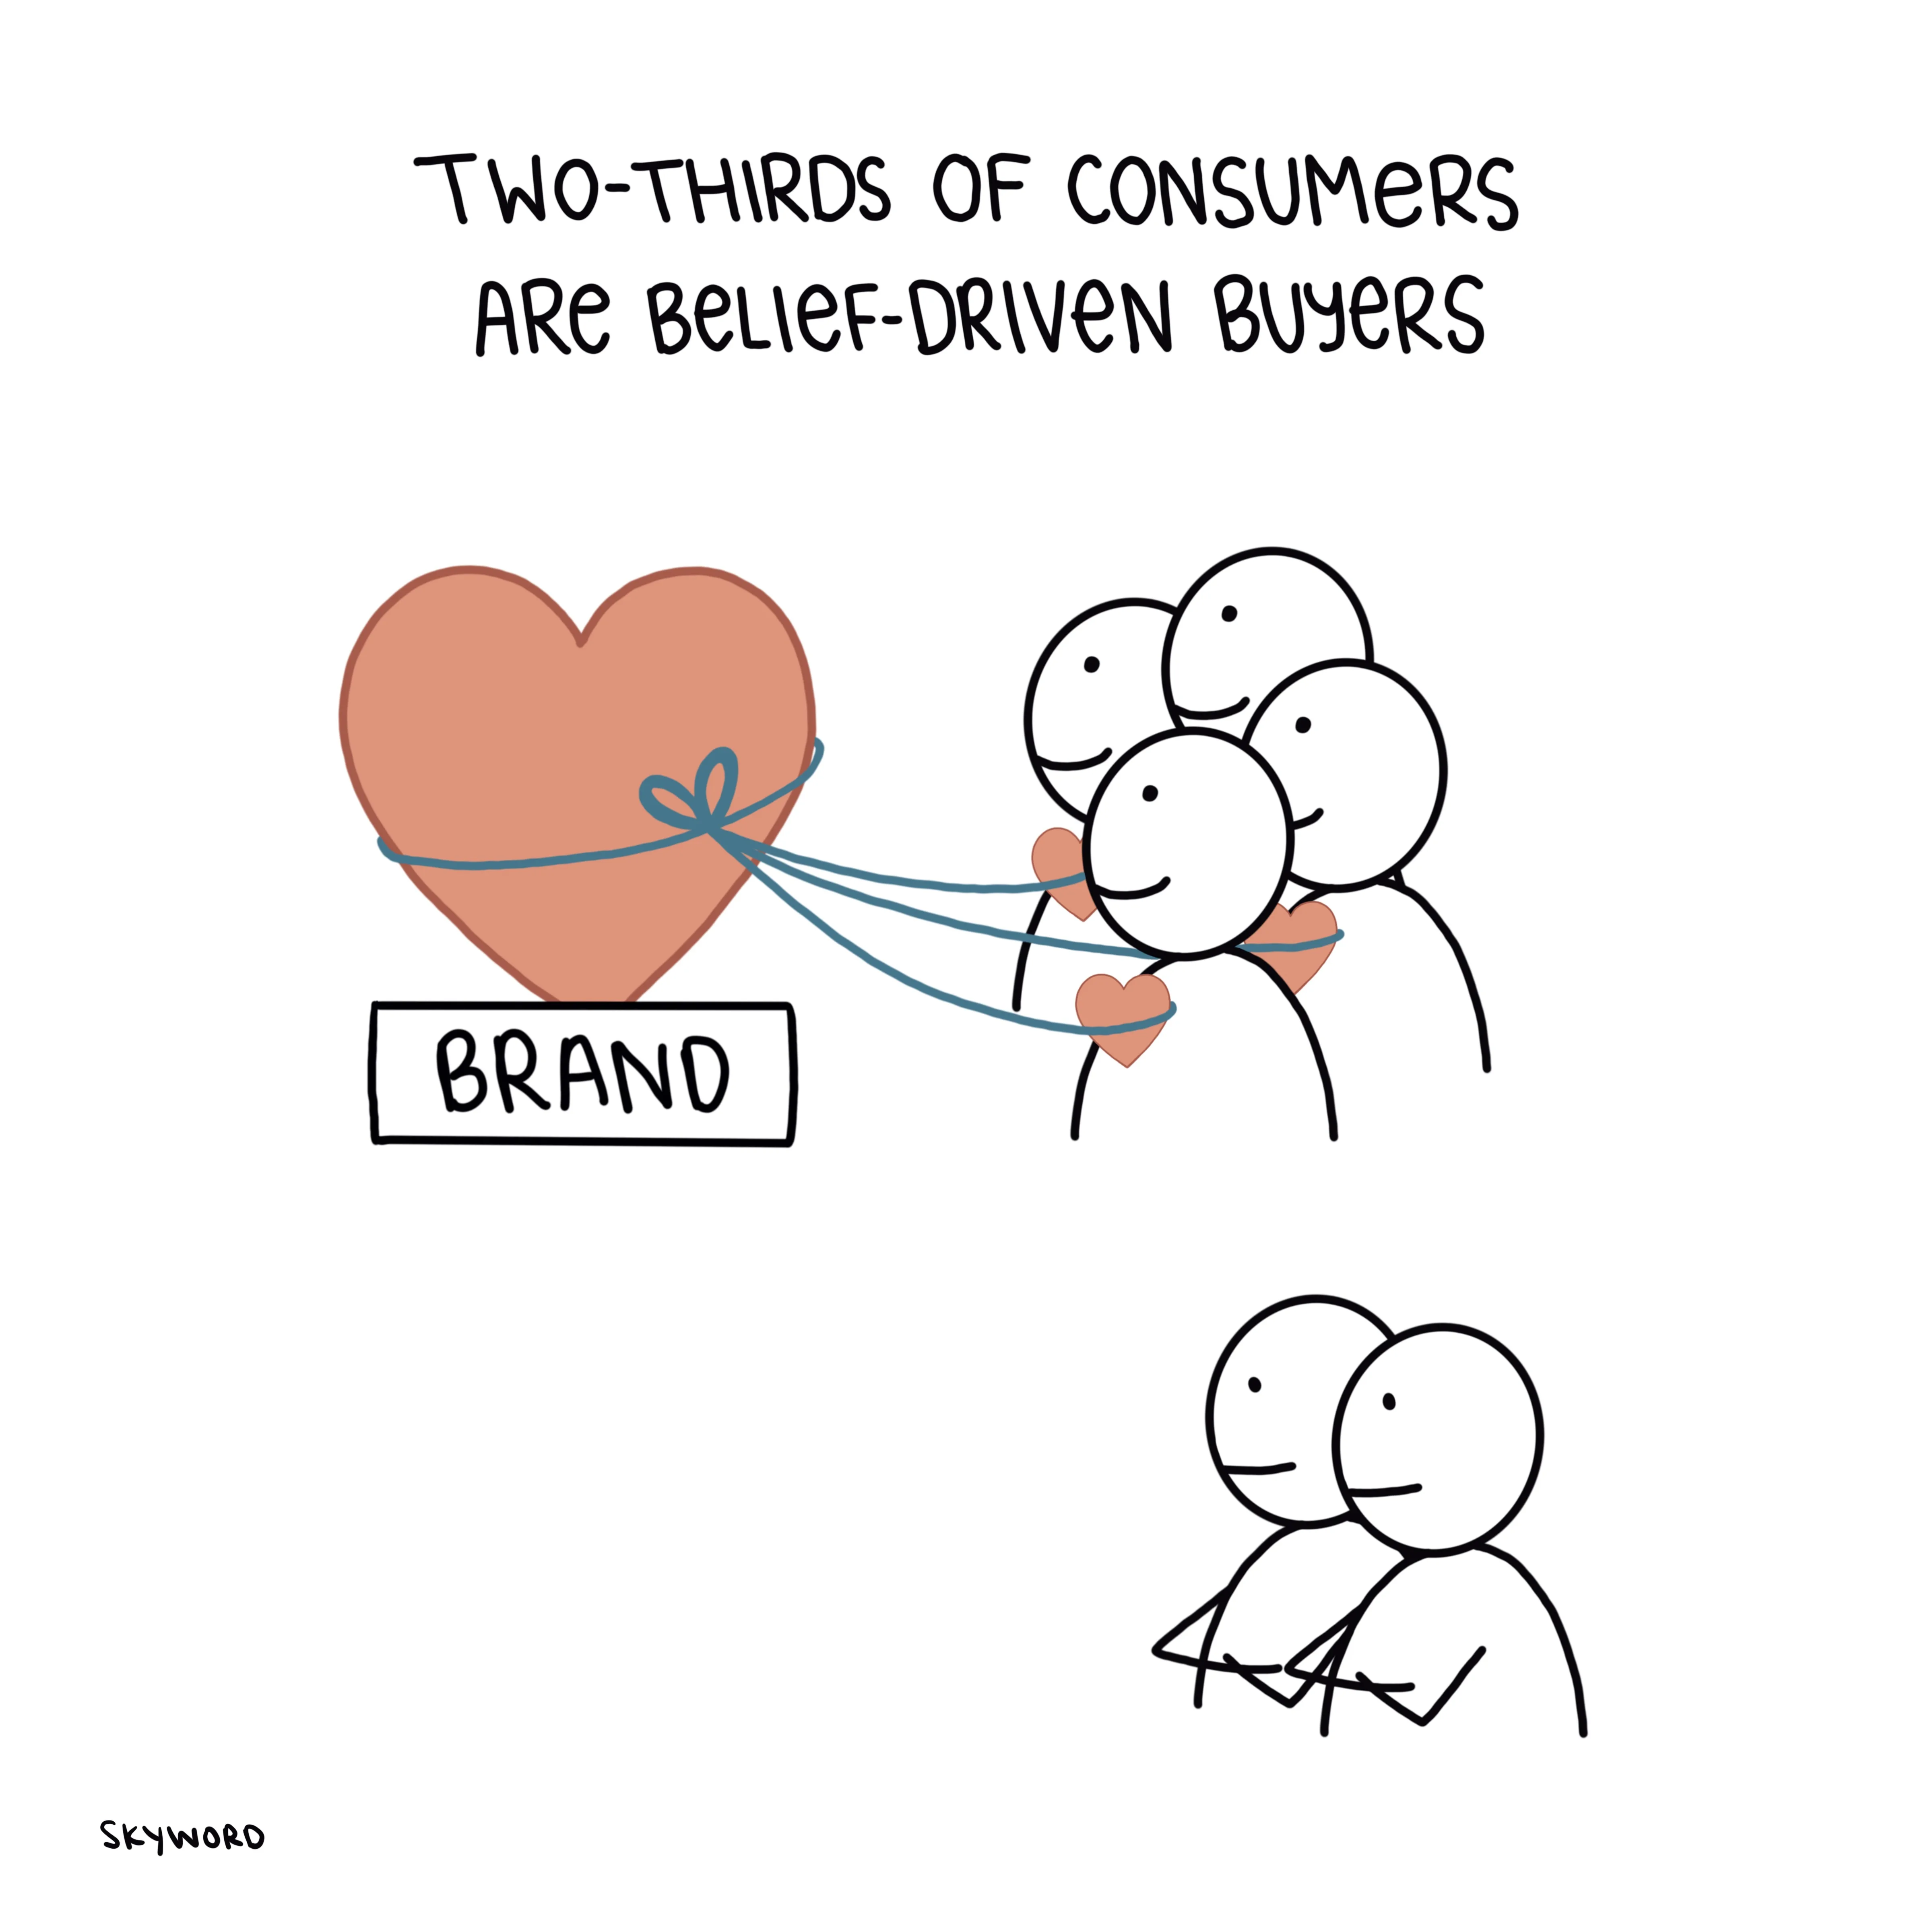 two-thirds of consumers are belief-driven buyers